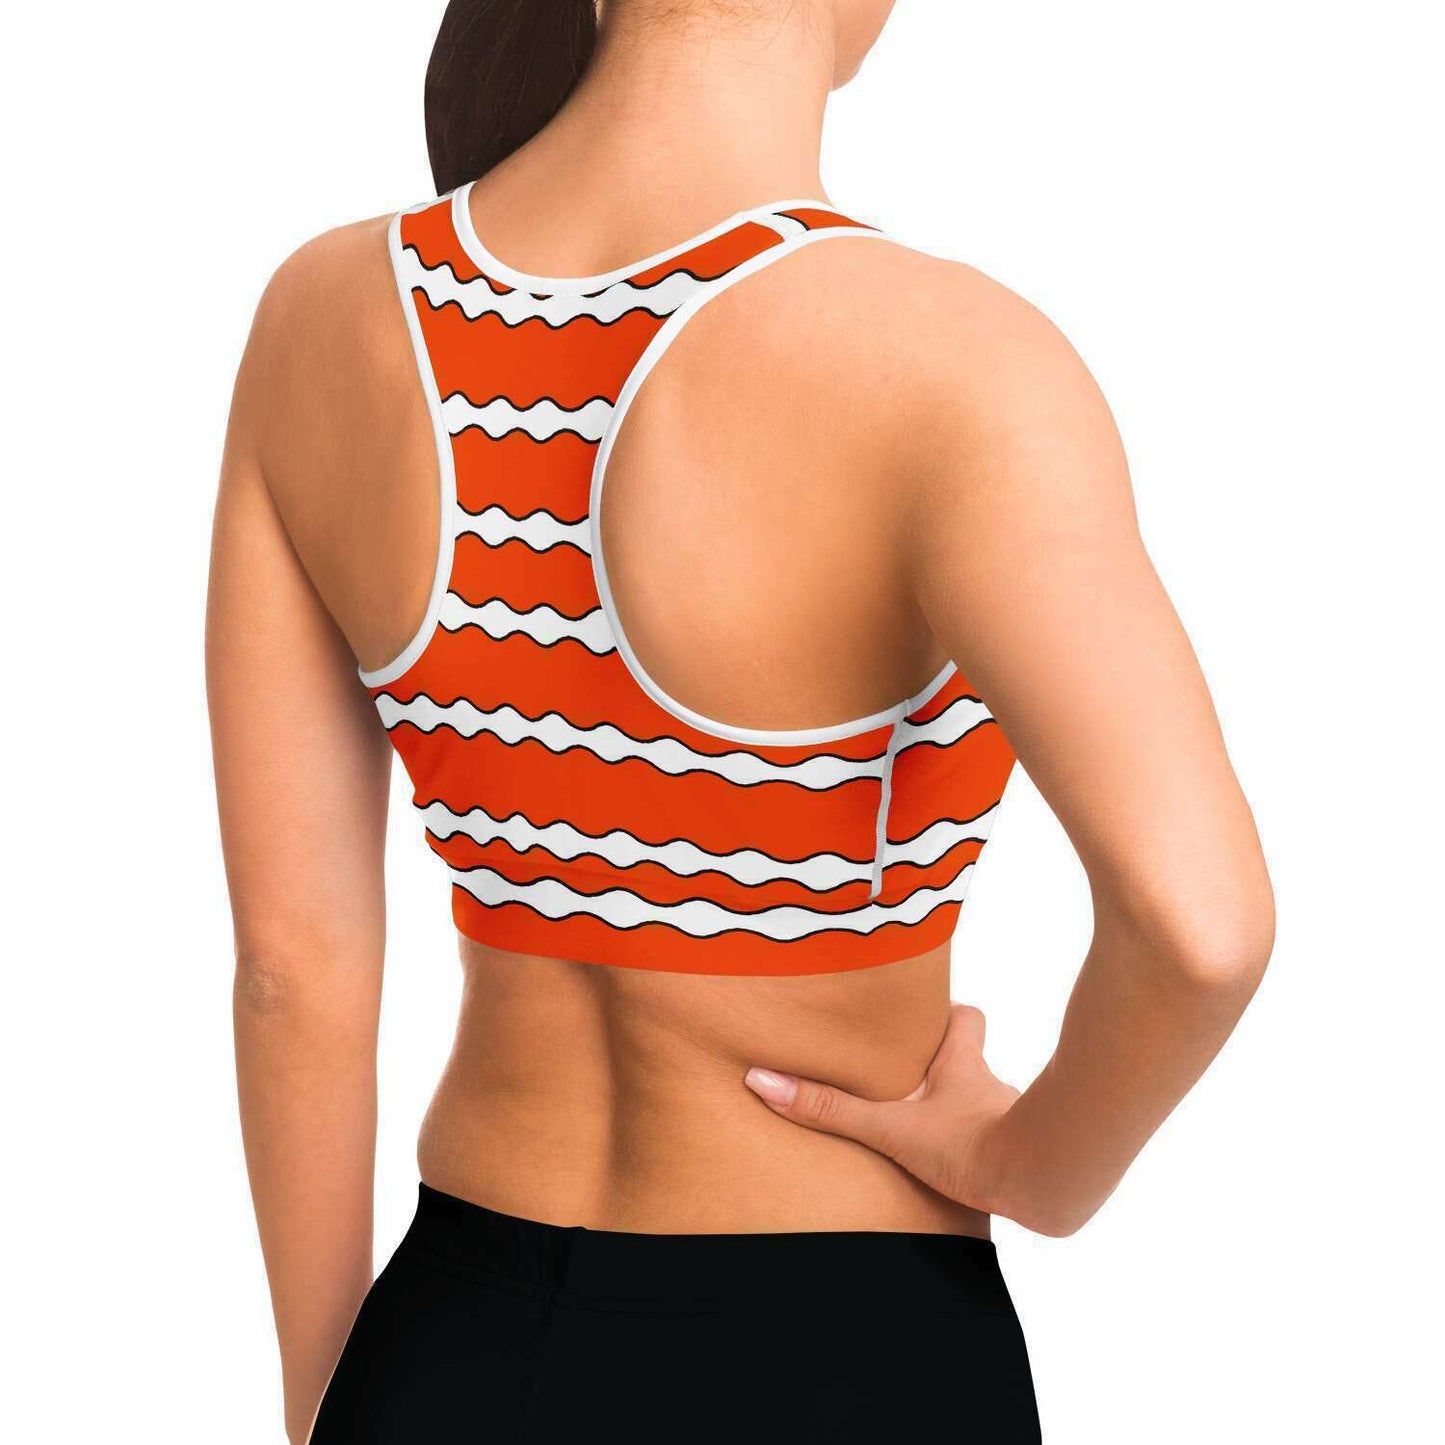 Side and back view of model wearing a clownfish racer-back crop top / sports bra so can see white stitching under the arm